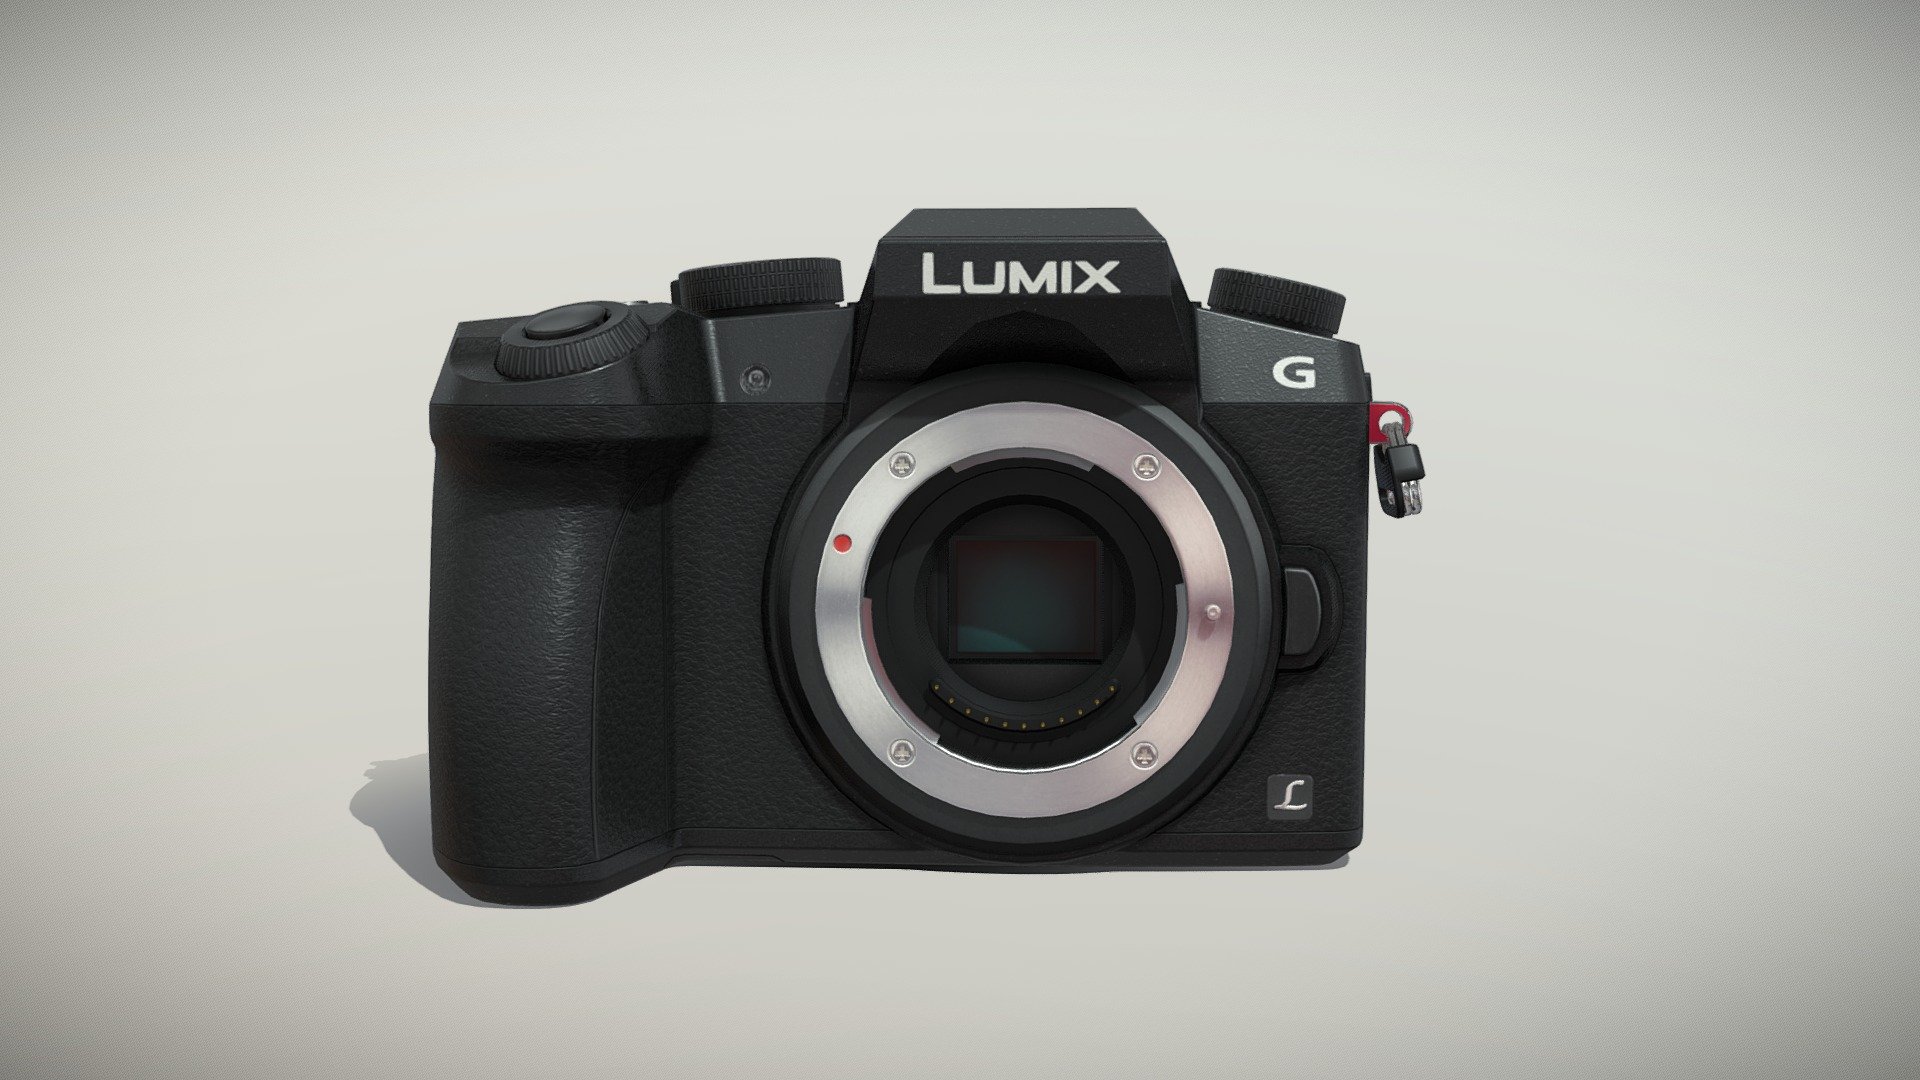 •   Let me present to you high-quality low-poly 3D model Panasonic Lumix DMC-G7 Mirrorless Micro Four Thirds Digital Camera.  Modeling was made with ortho-photos of real camera that is why all details of design are recreated most authentically.

•    This model consists of a few meshes, it is low-polygonal and it has only one material.

•   The total of the main textures is 5. Resolution of all textures is 4096 pixels square aspect ratio in .png format. Also there is original texture file .PSD format in separate archive.

•   Polygon count of the model is – 7667.

•   The model has correct dimensions in real-world scale. All parts grouped and named correctly.

•   To use the model in other 3D programs there are scenes saved in formats .fbx, .obj, .DAE, .max (2010 version).

Note: If you see some artifacts on the textures, it means compression works in the Viewer. We recommend setting HD quality for textures. But anyway, original textures have no artifacts 3d model